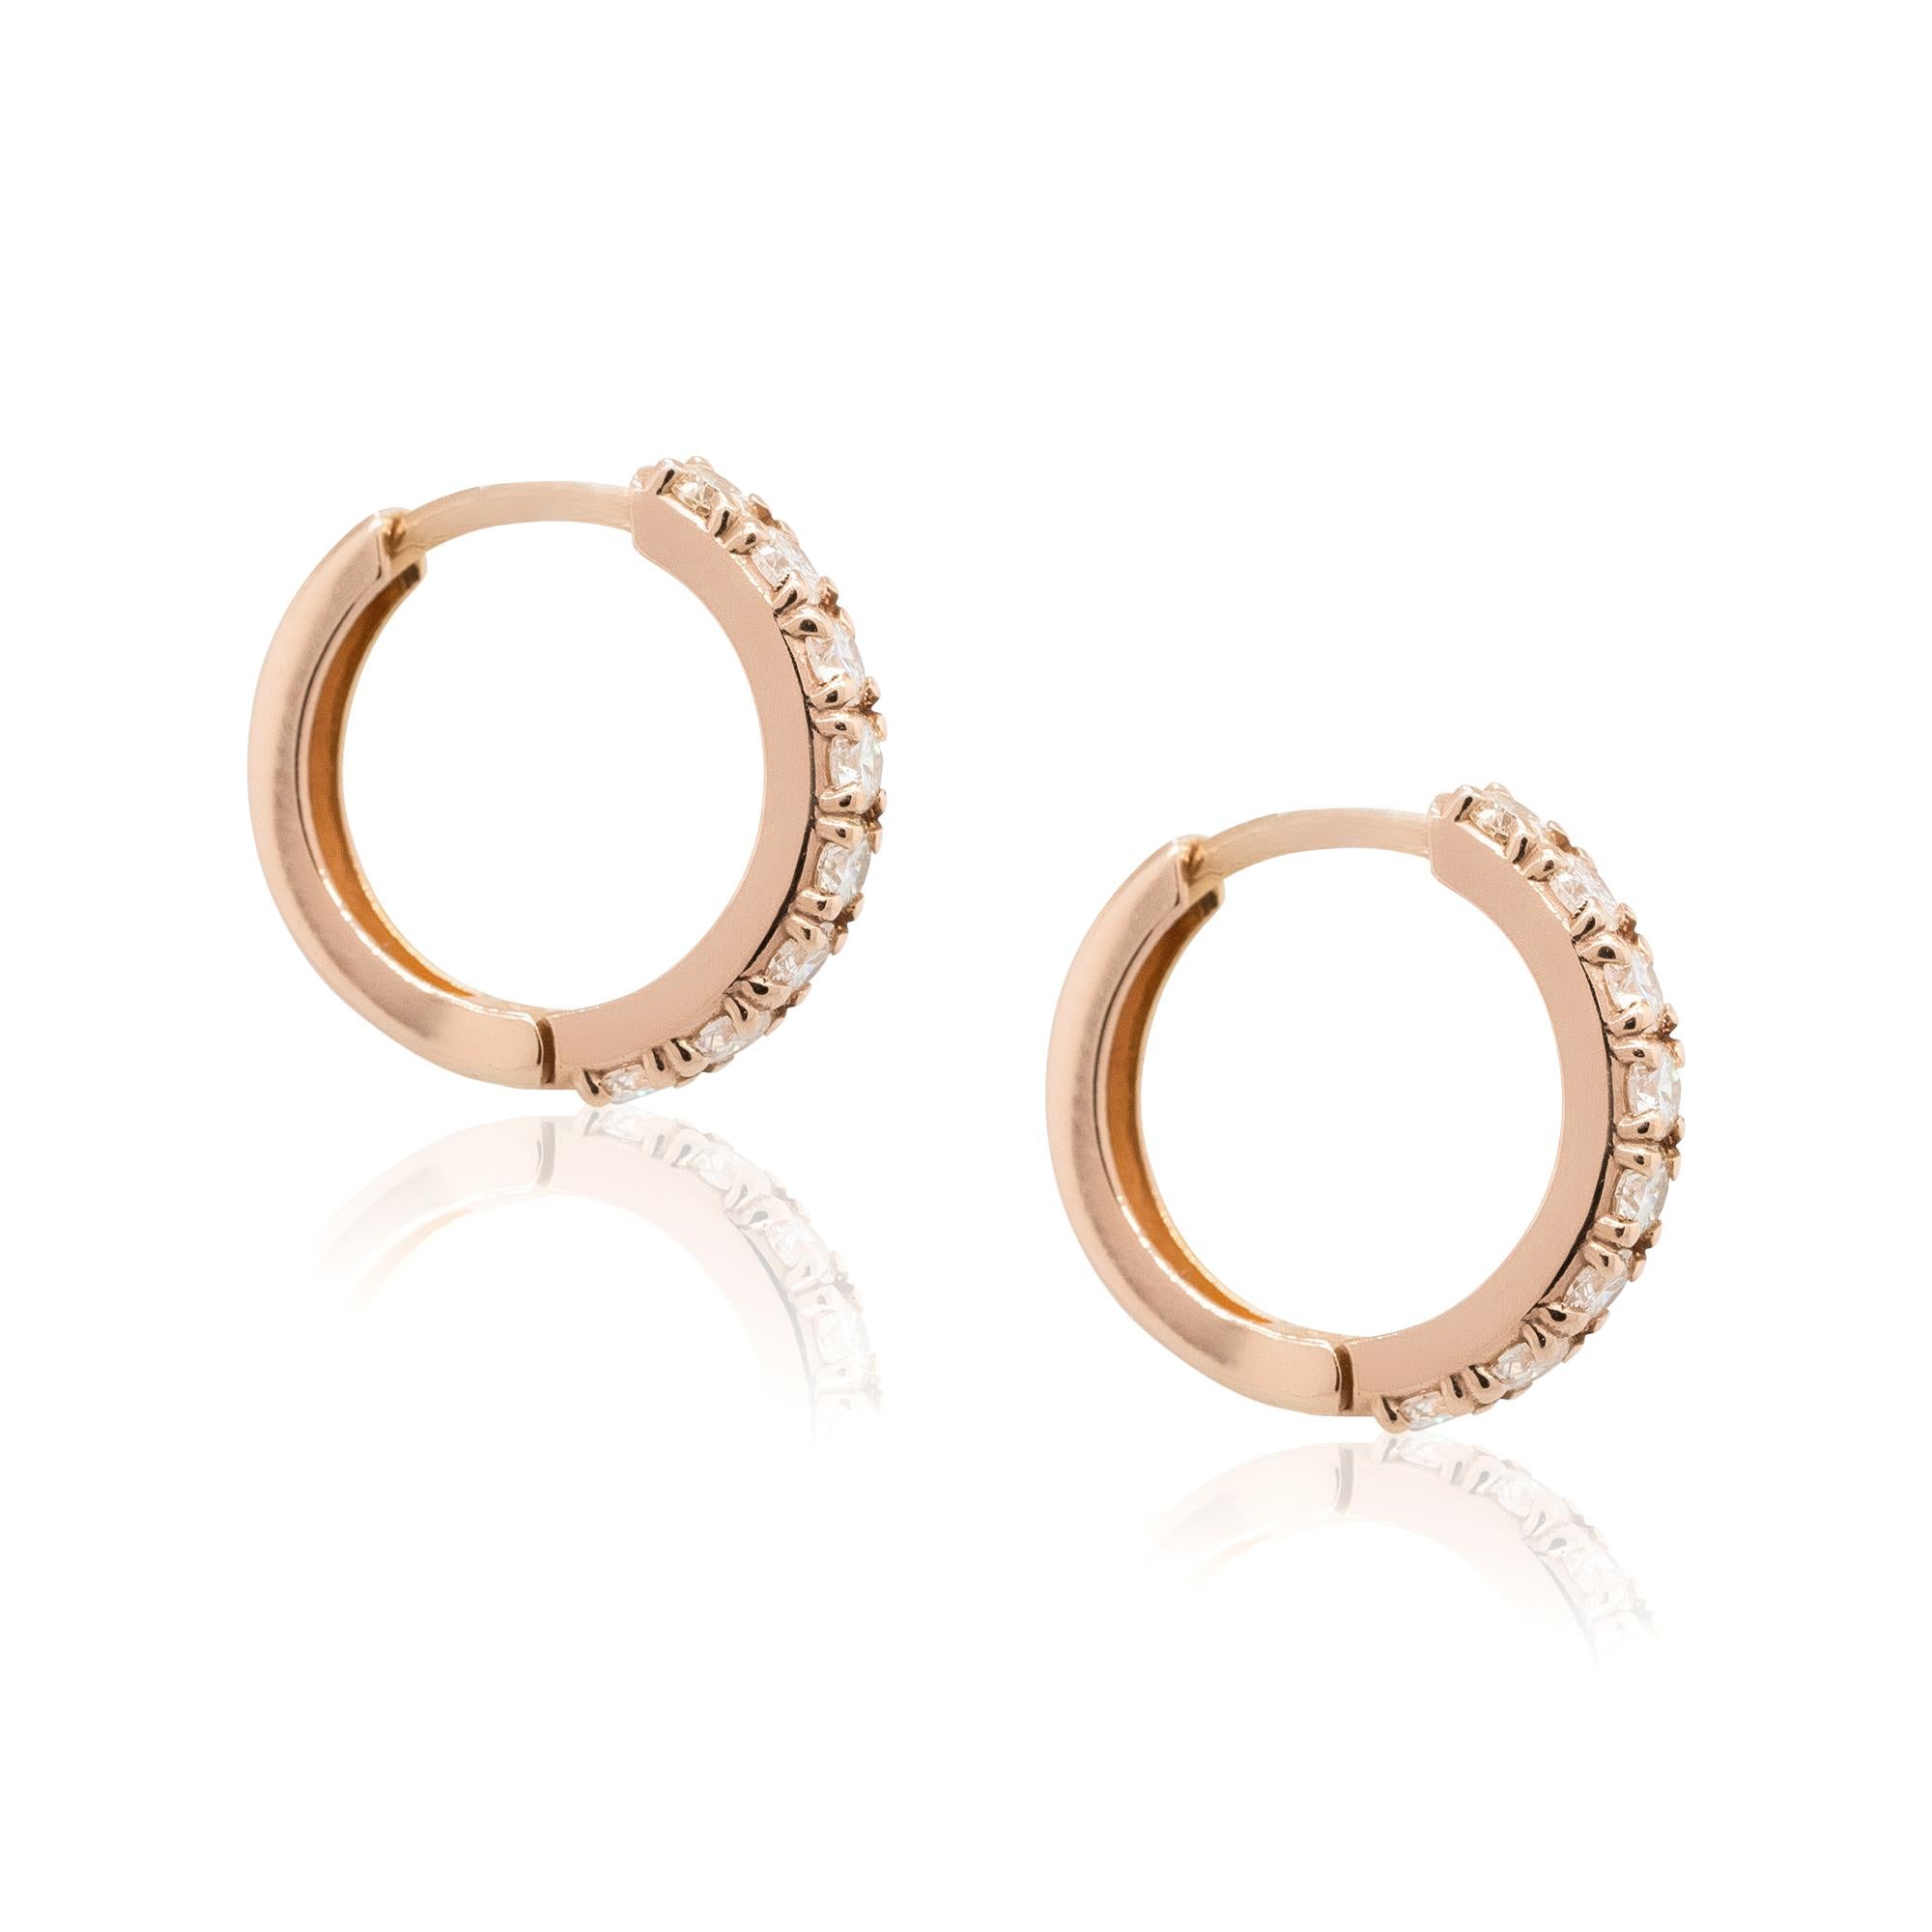 14k Rose Gold 0.66ctw Diamond Huggie Earrings
These 14k Rose Gold 0.66ctw Diamond Huggie Earrings are a charming and elegant accessory for any occasion. Crafted in lustrous rose gold, these huggie-style earrings are adorned with a total of 0.66